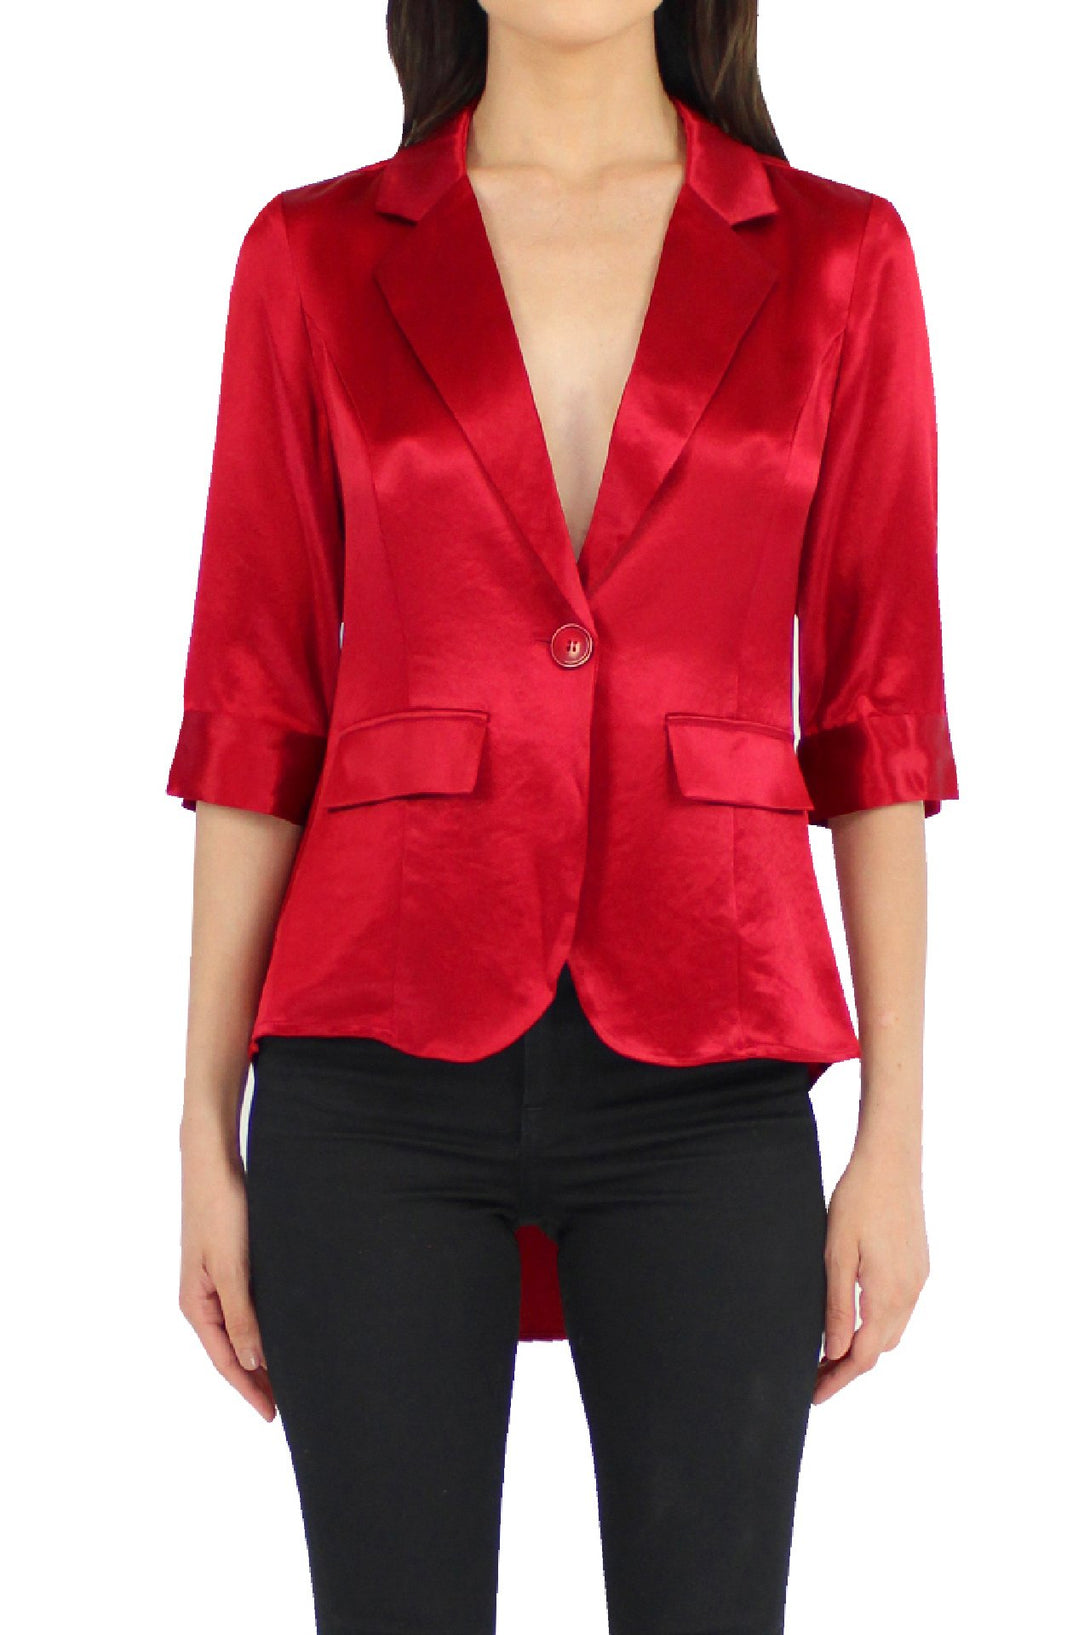 Women-Designer-Trench-Coat-In-Red-By-Kyle-Richards